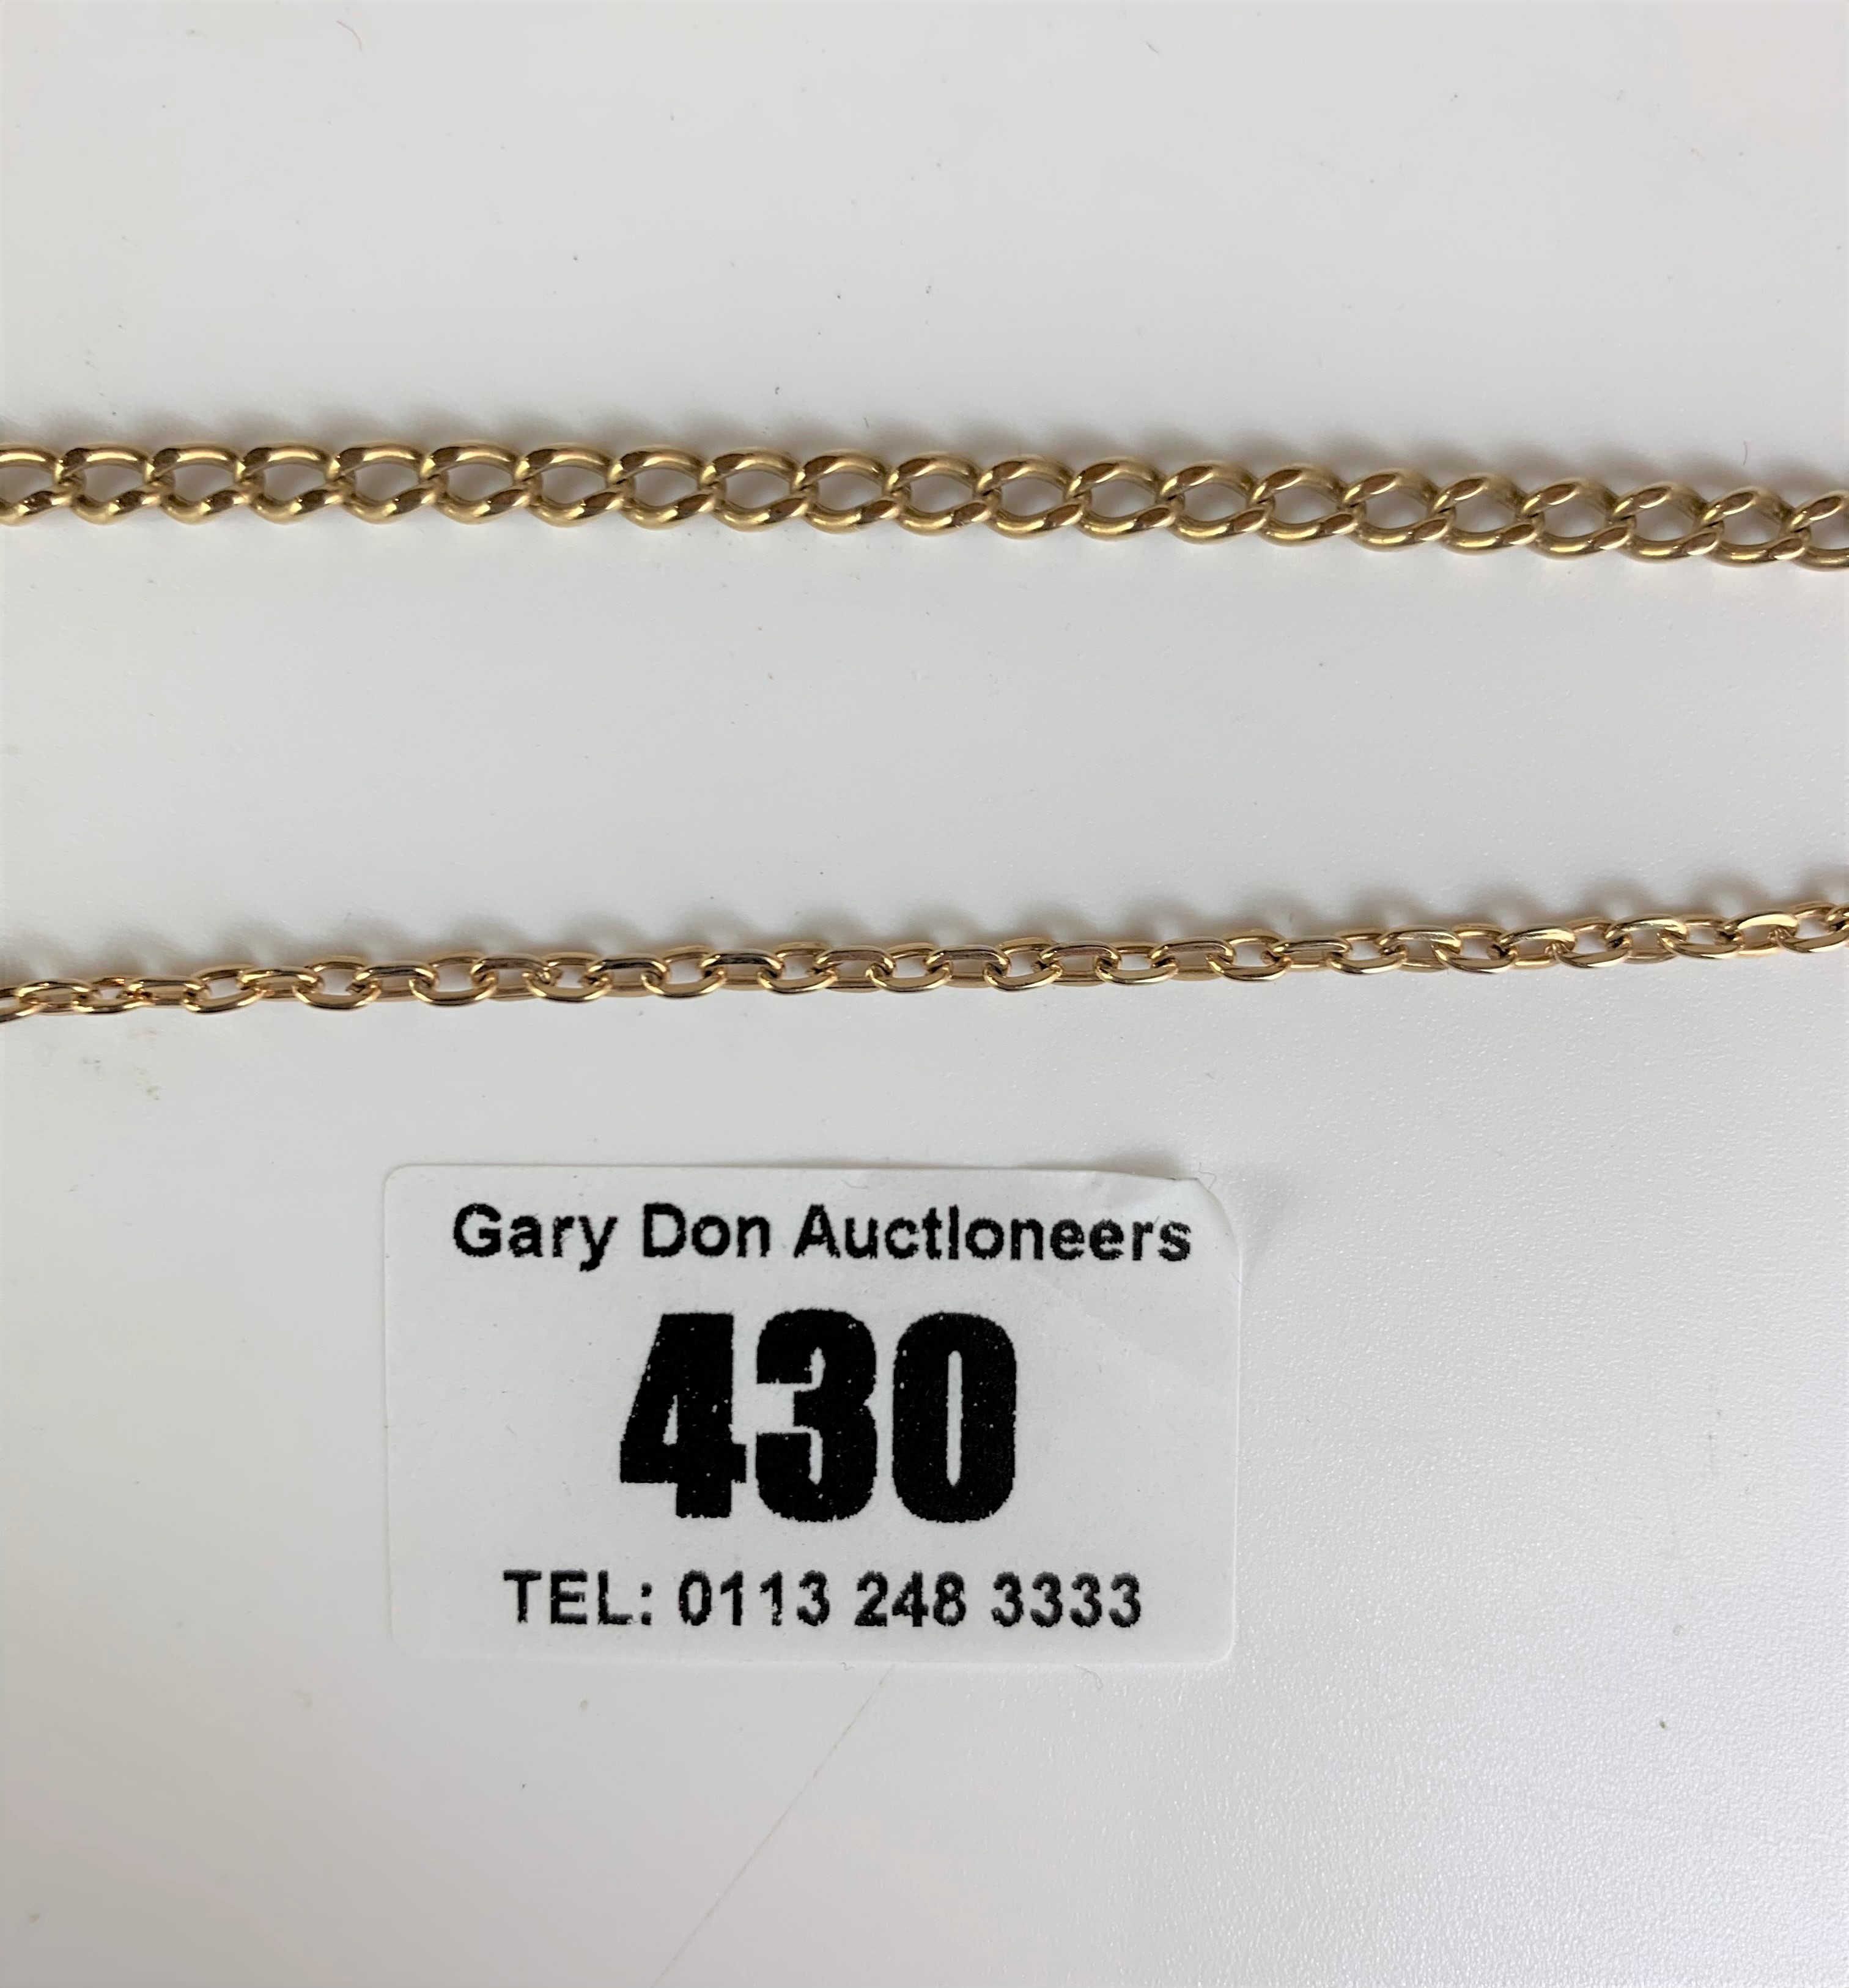 9k gold necklace (broken), length 21.5”, w: 11 gms and unmarked piece of chain 6” - Image 3 of 3